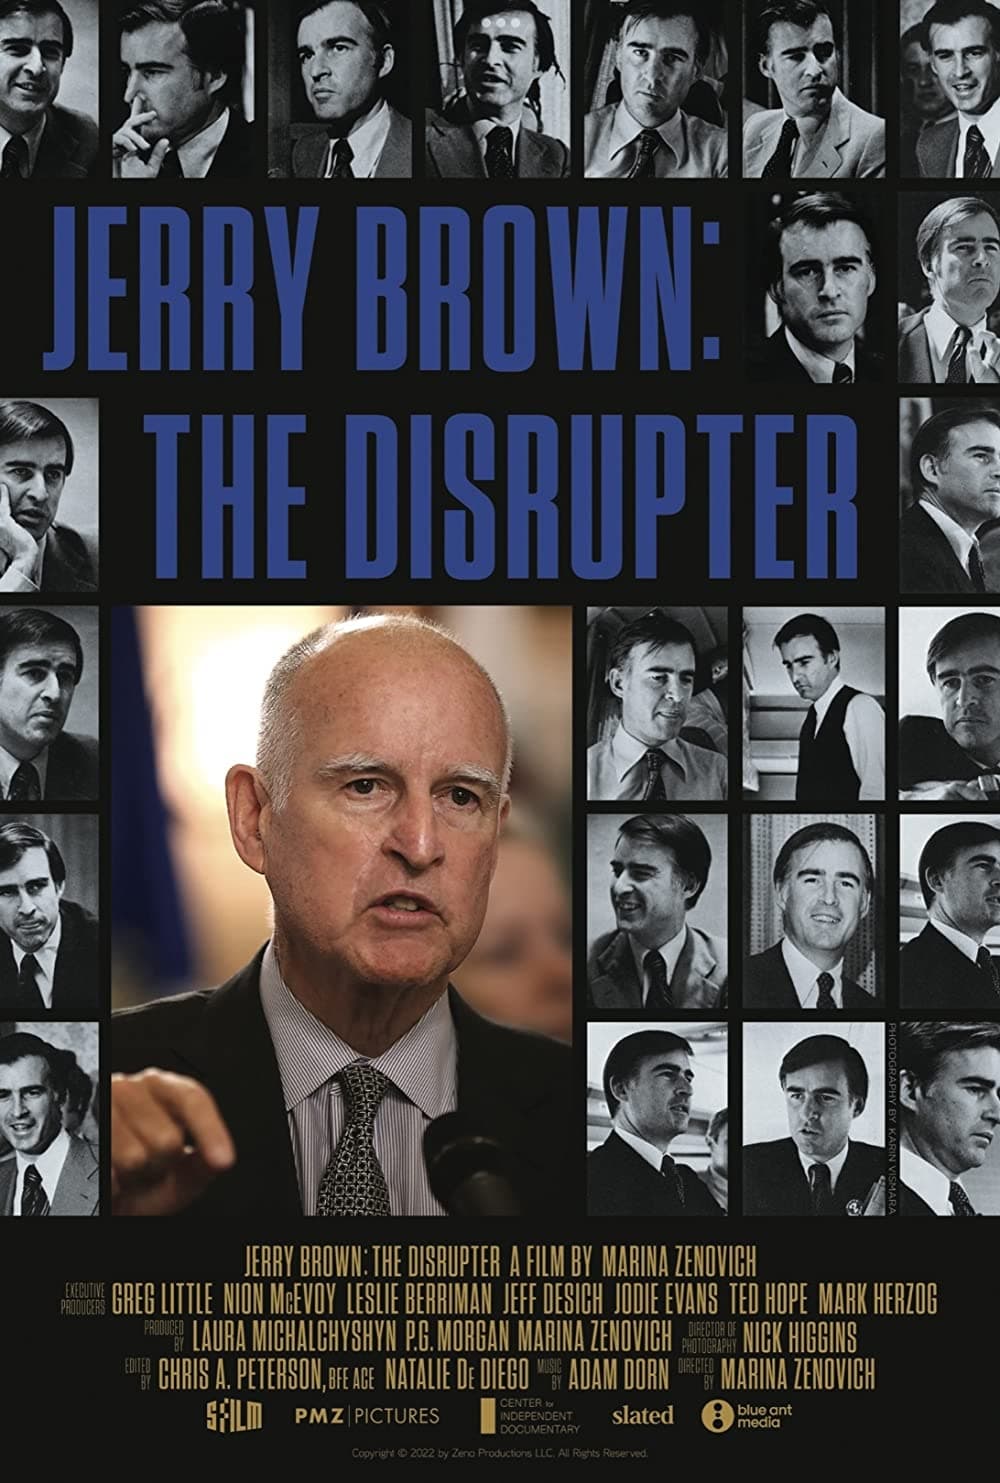 Jerry Brown: The Disrupter